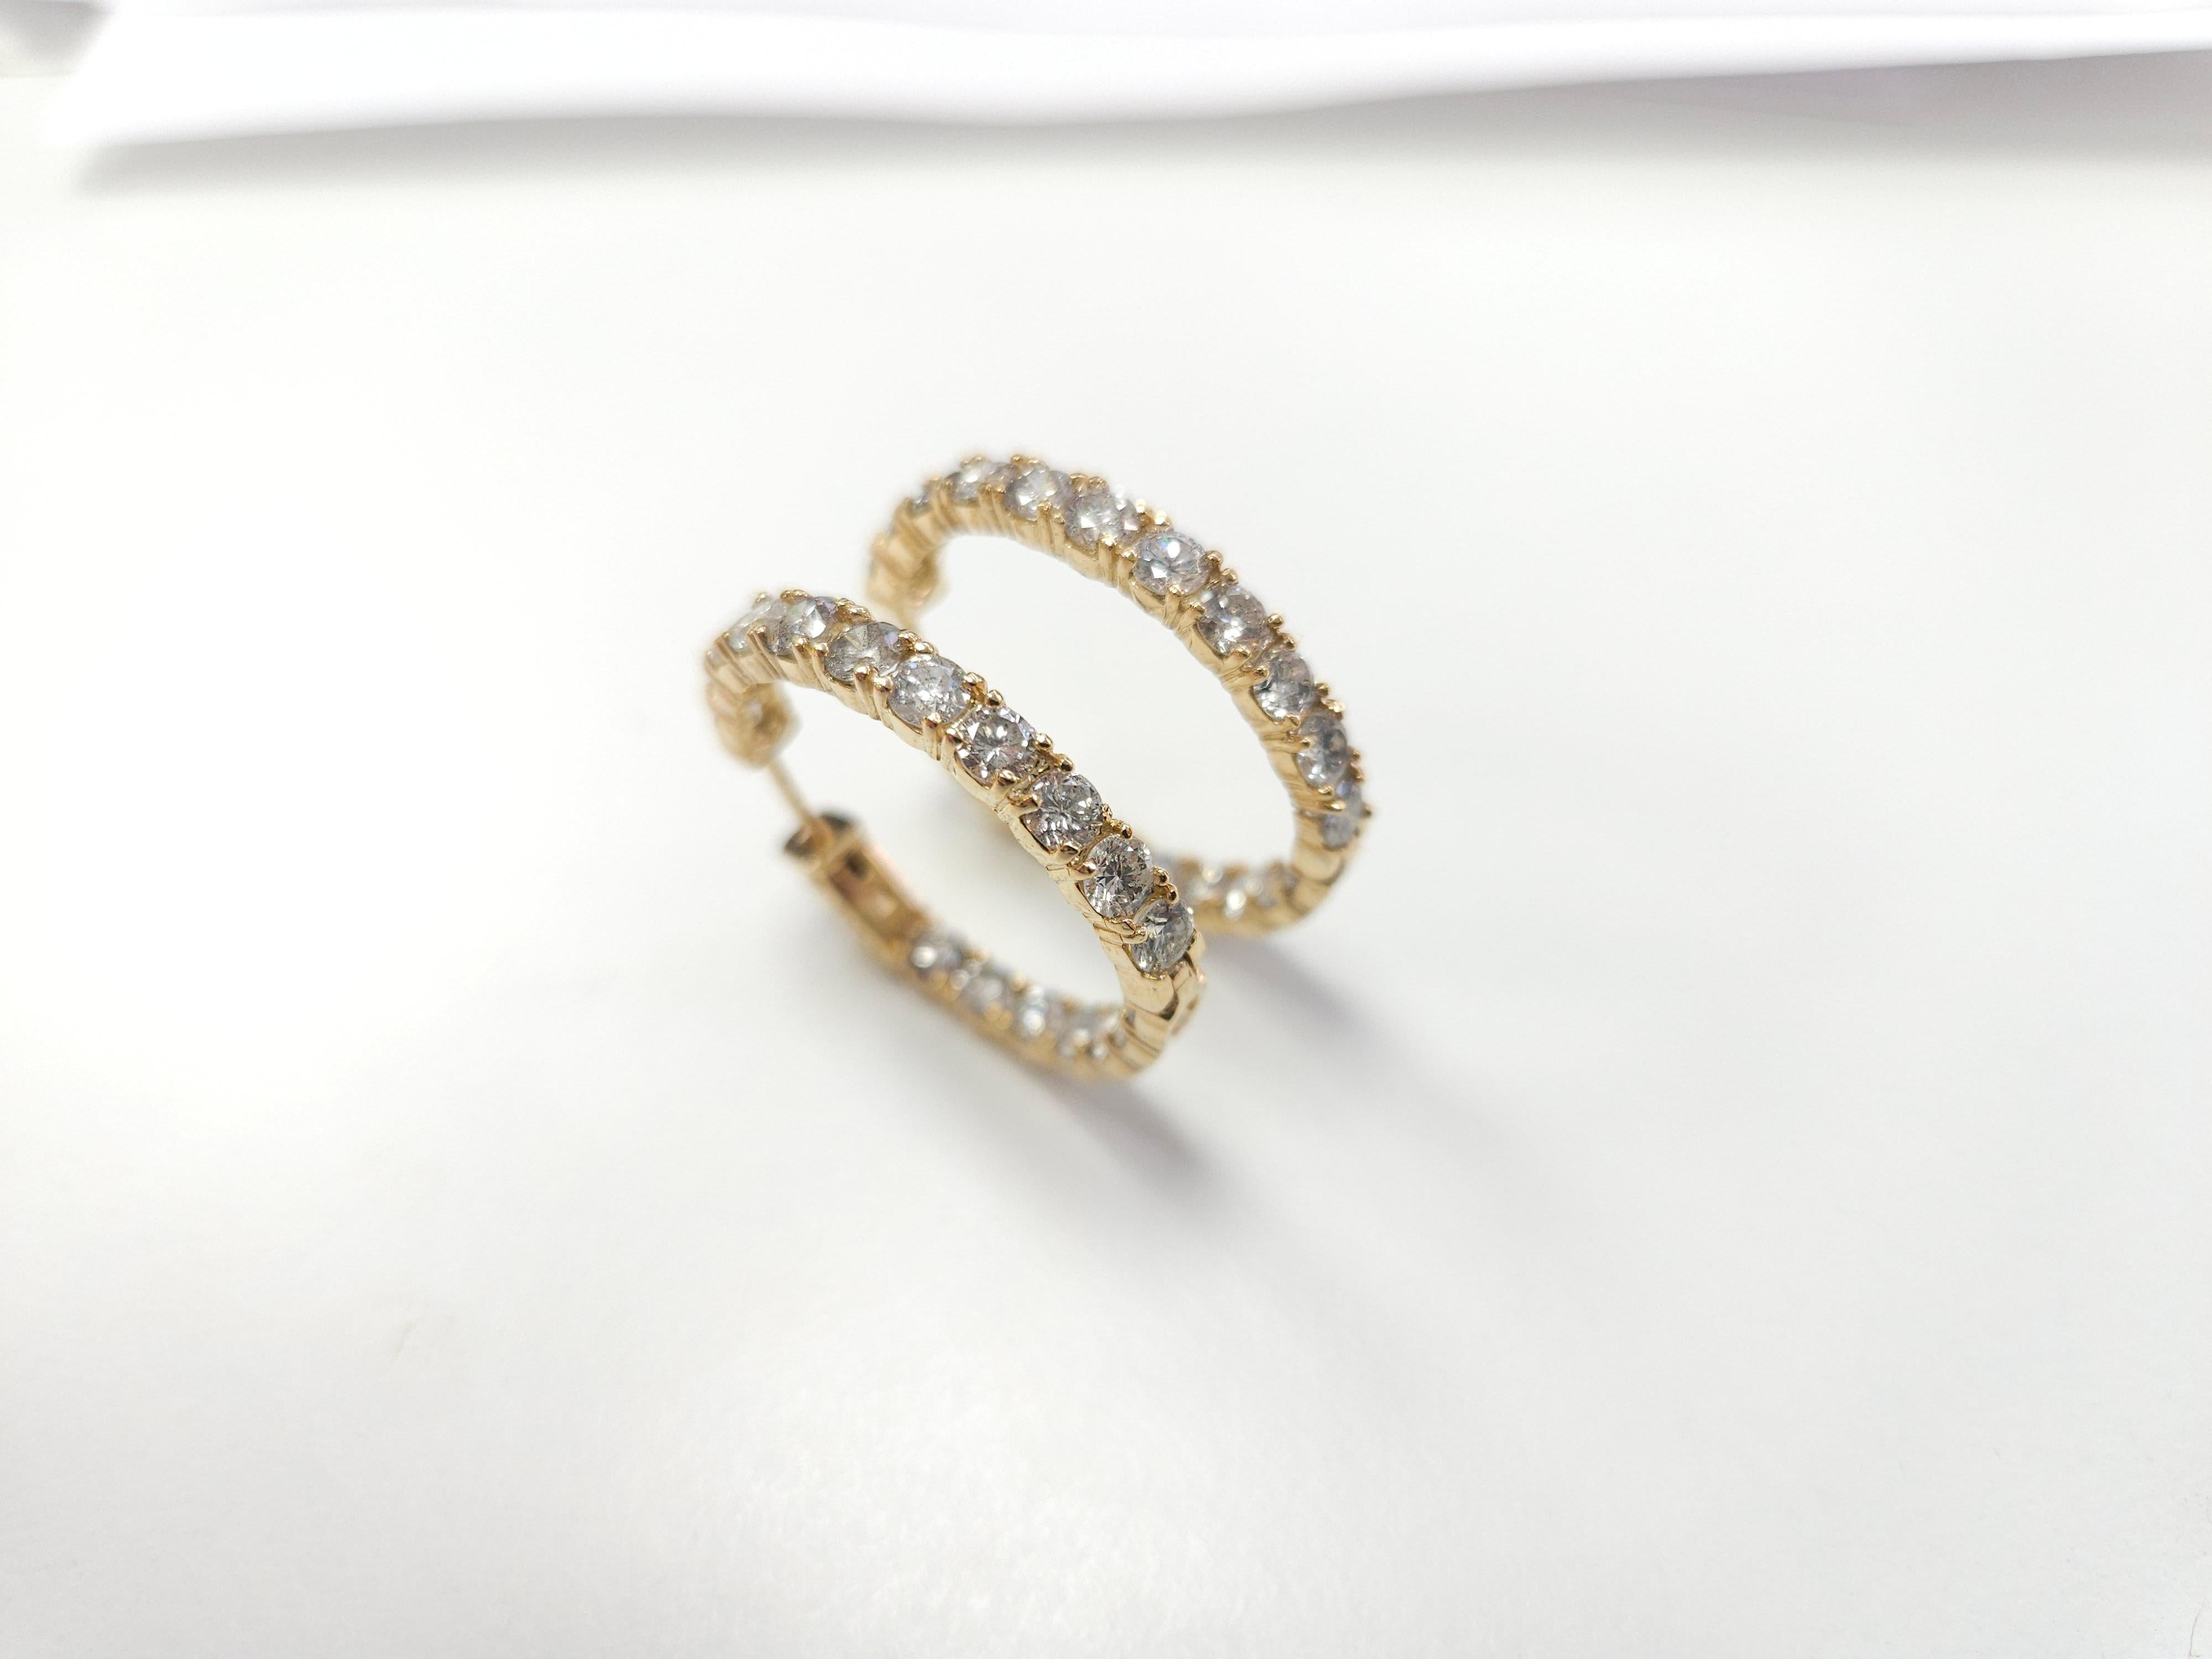 Beautiful pair of diamond Huggie hoop earrings in 14k yellow gold. Secures with snap closure for wear. Elegance for every moment. Inside out style
Average Color H, Clarity  SI,I 
Measures 1.00 inch diameter.  9.35 grams

*Free Shipping within U.S*